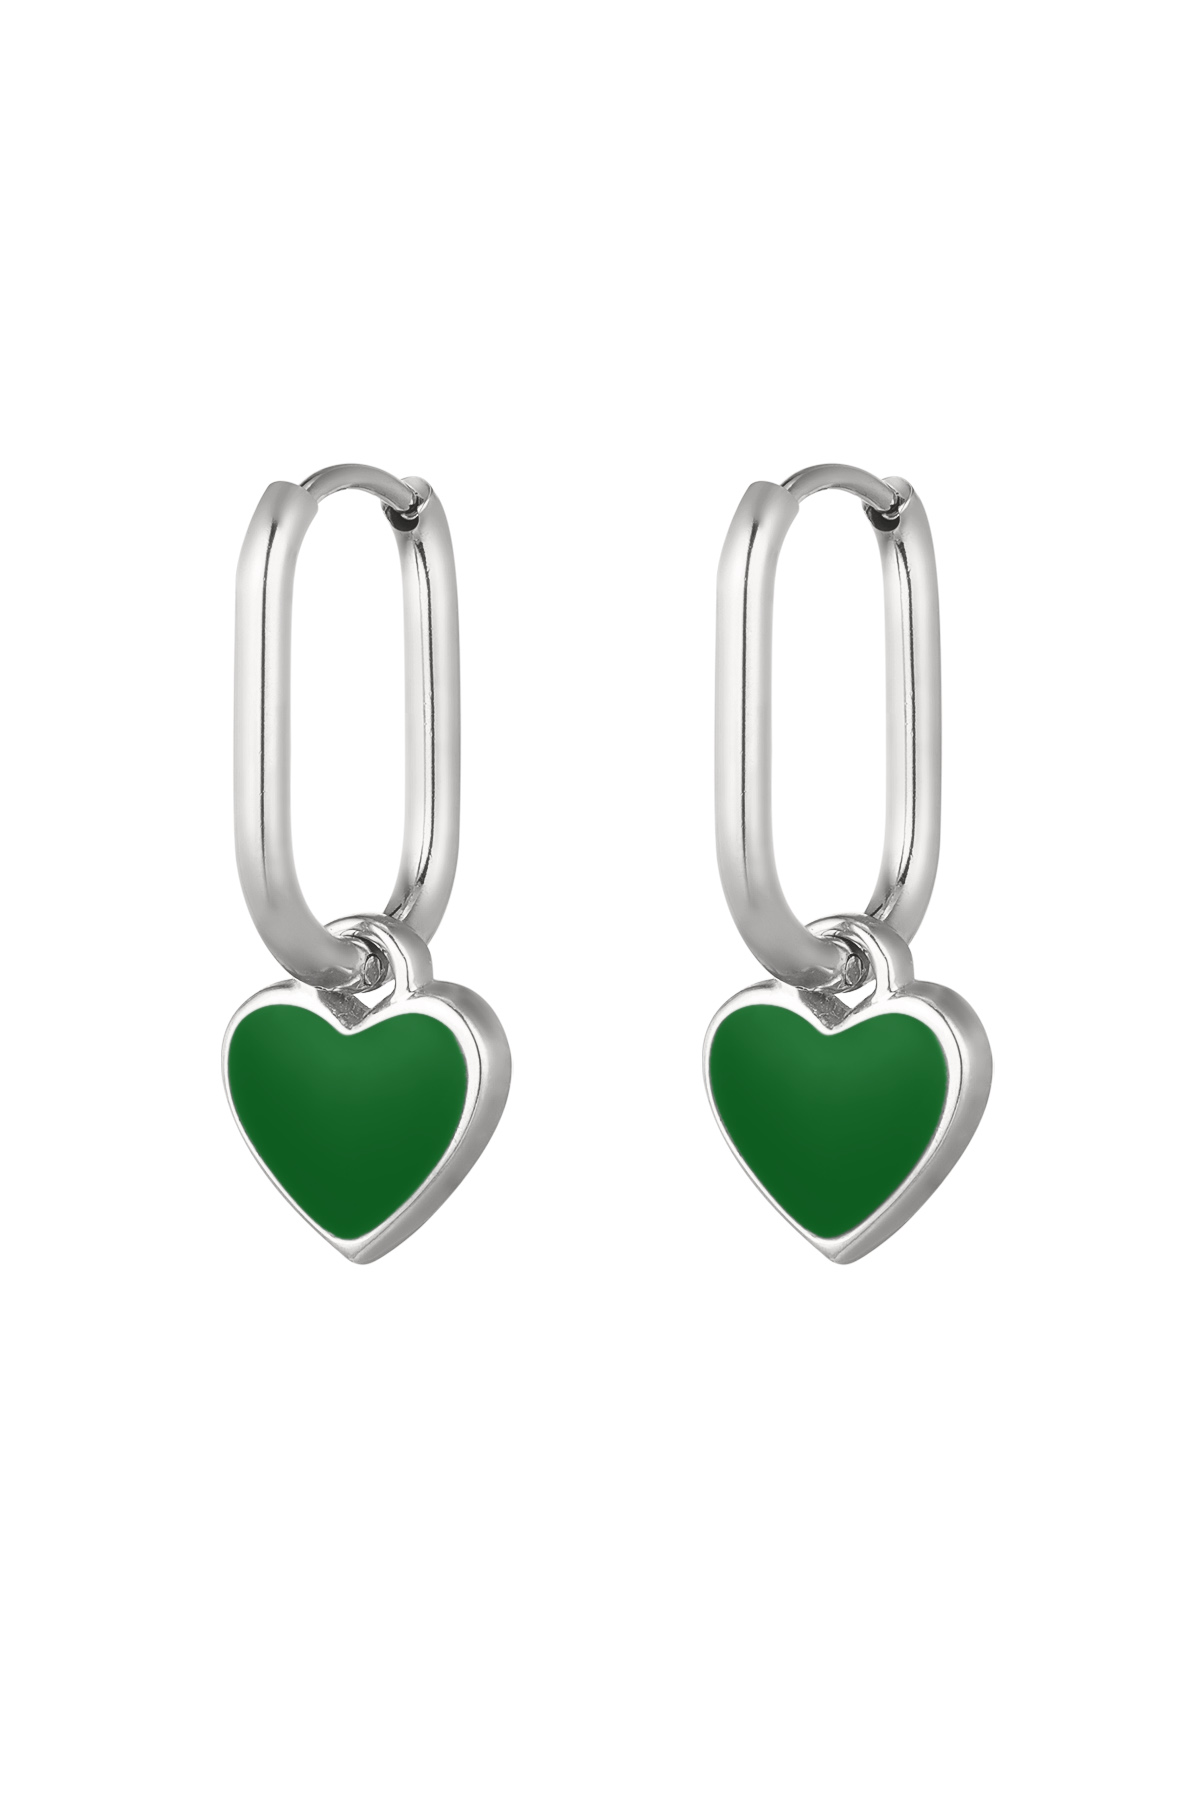 Colored heart earrings Green/silver Stainless Steel h5 